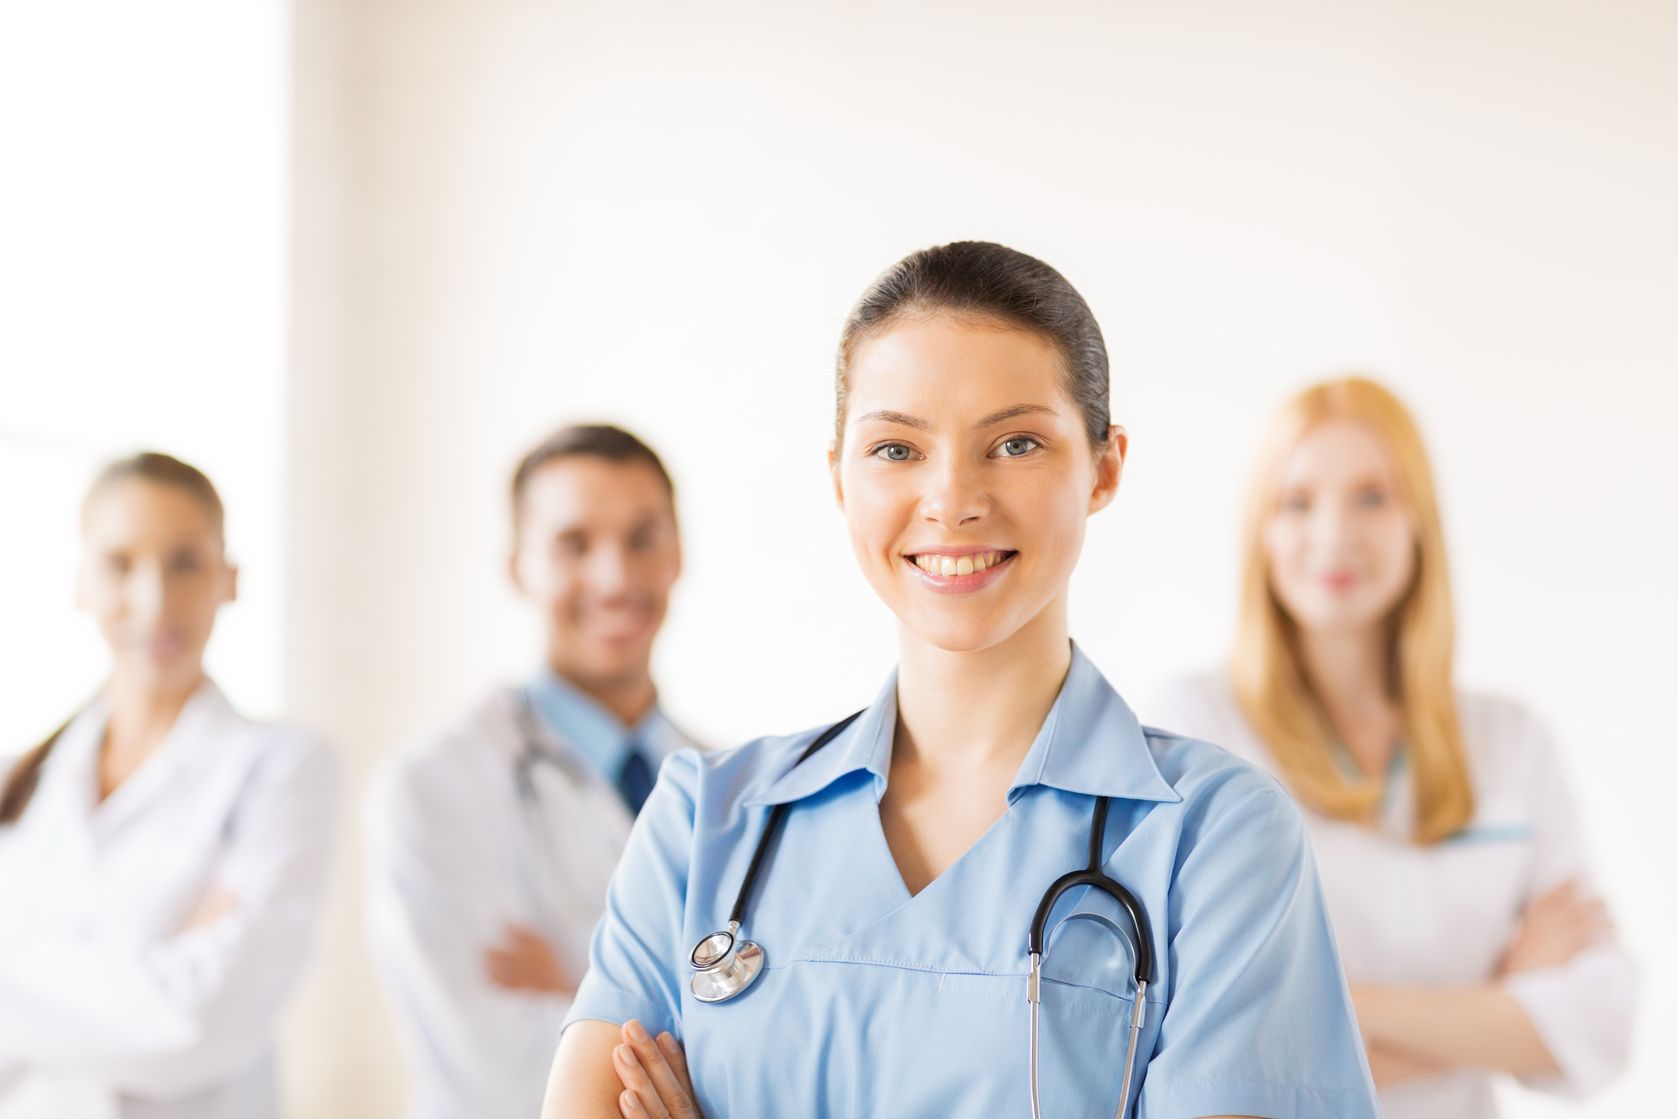 20 Allied Health Careers in High Demand